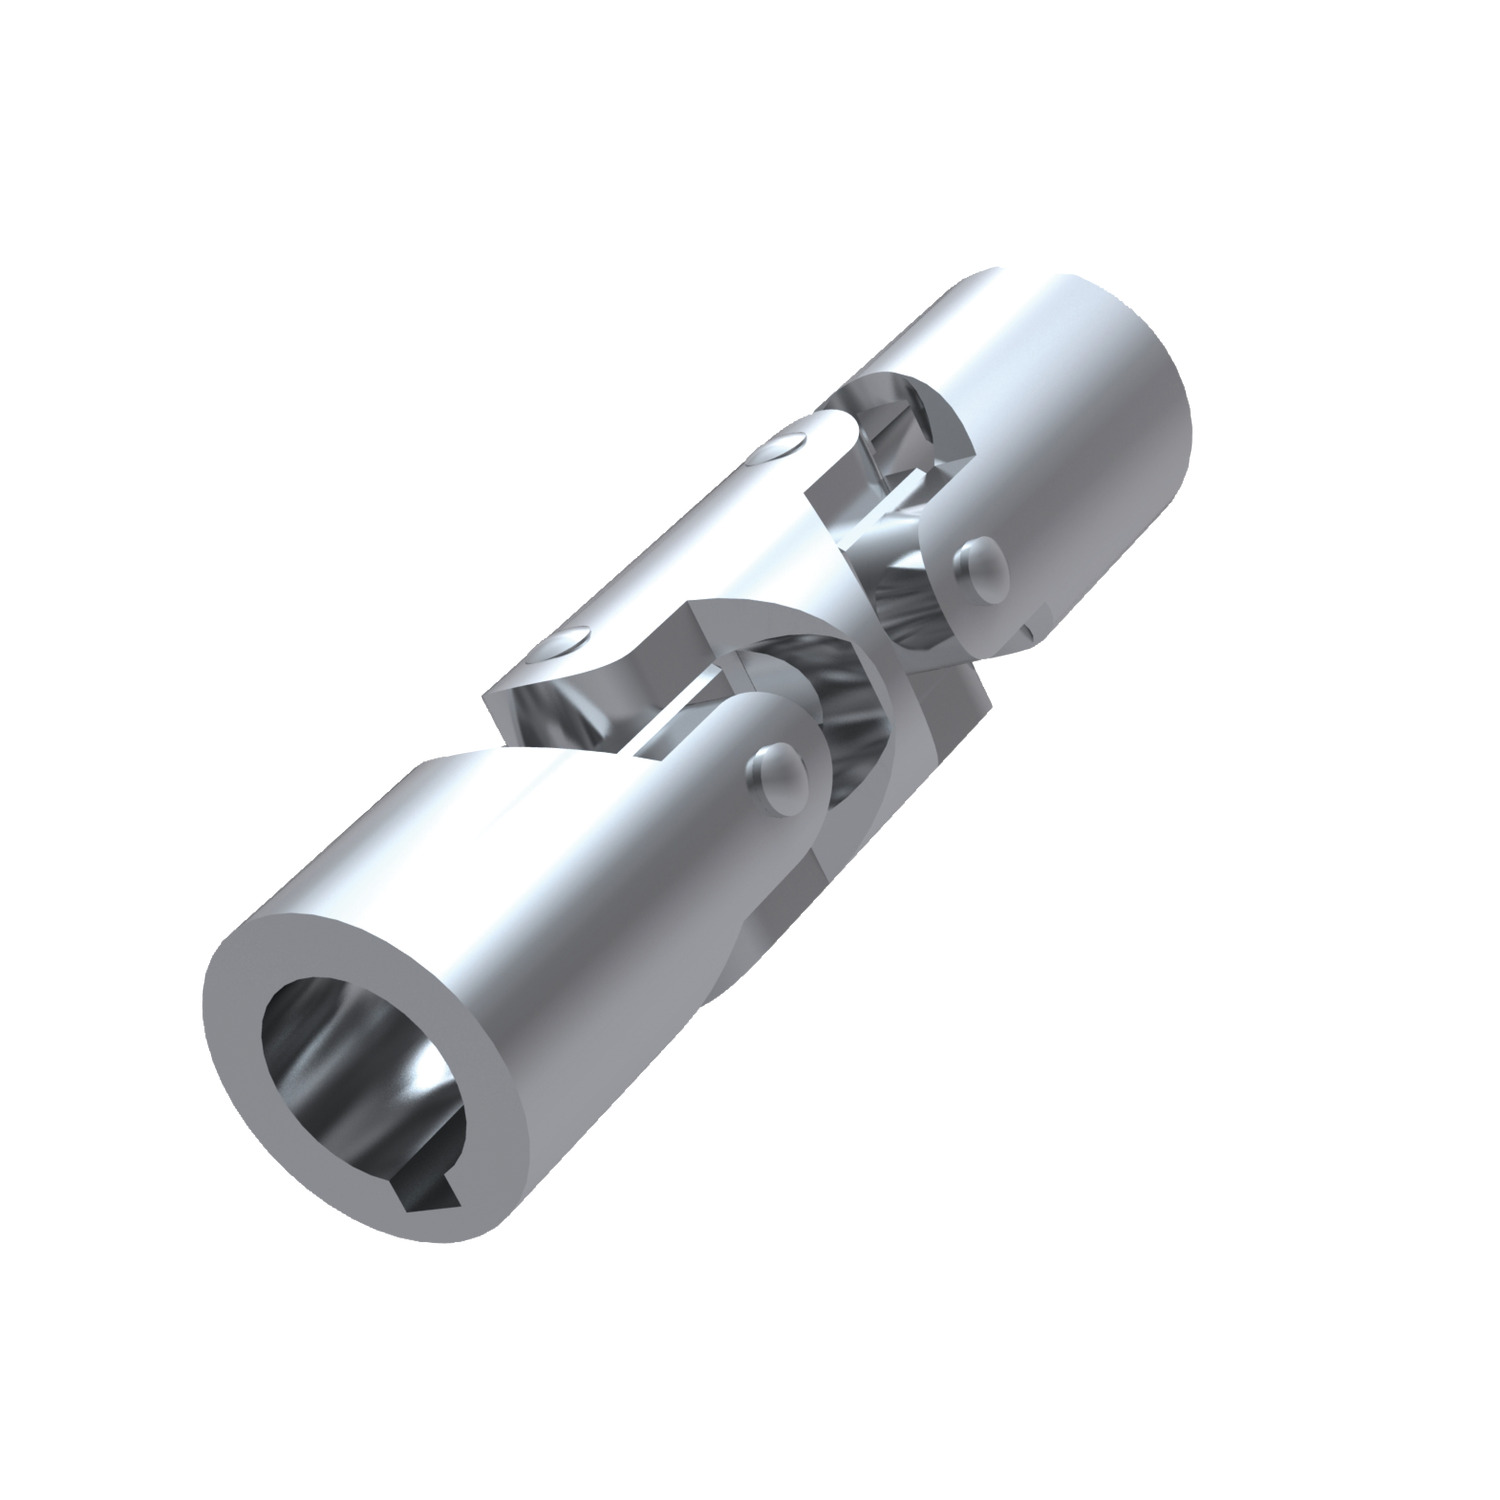 Double Universal Joint Steel double universal joints manufactured to DIN 808. Maximum bending angle of 45° per joint.